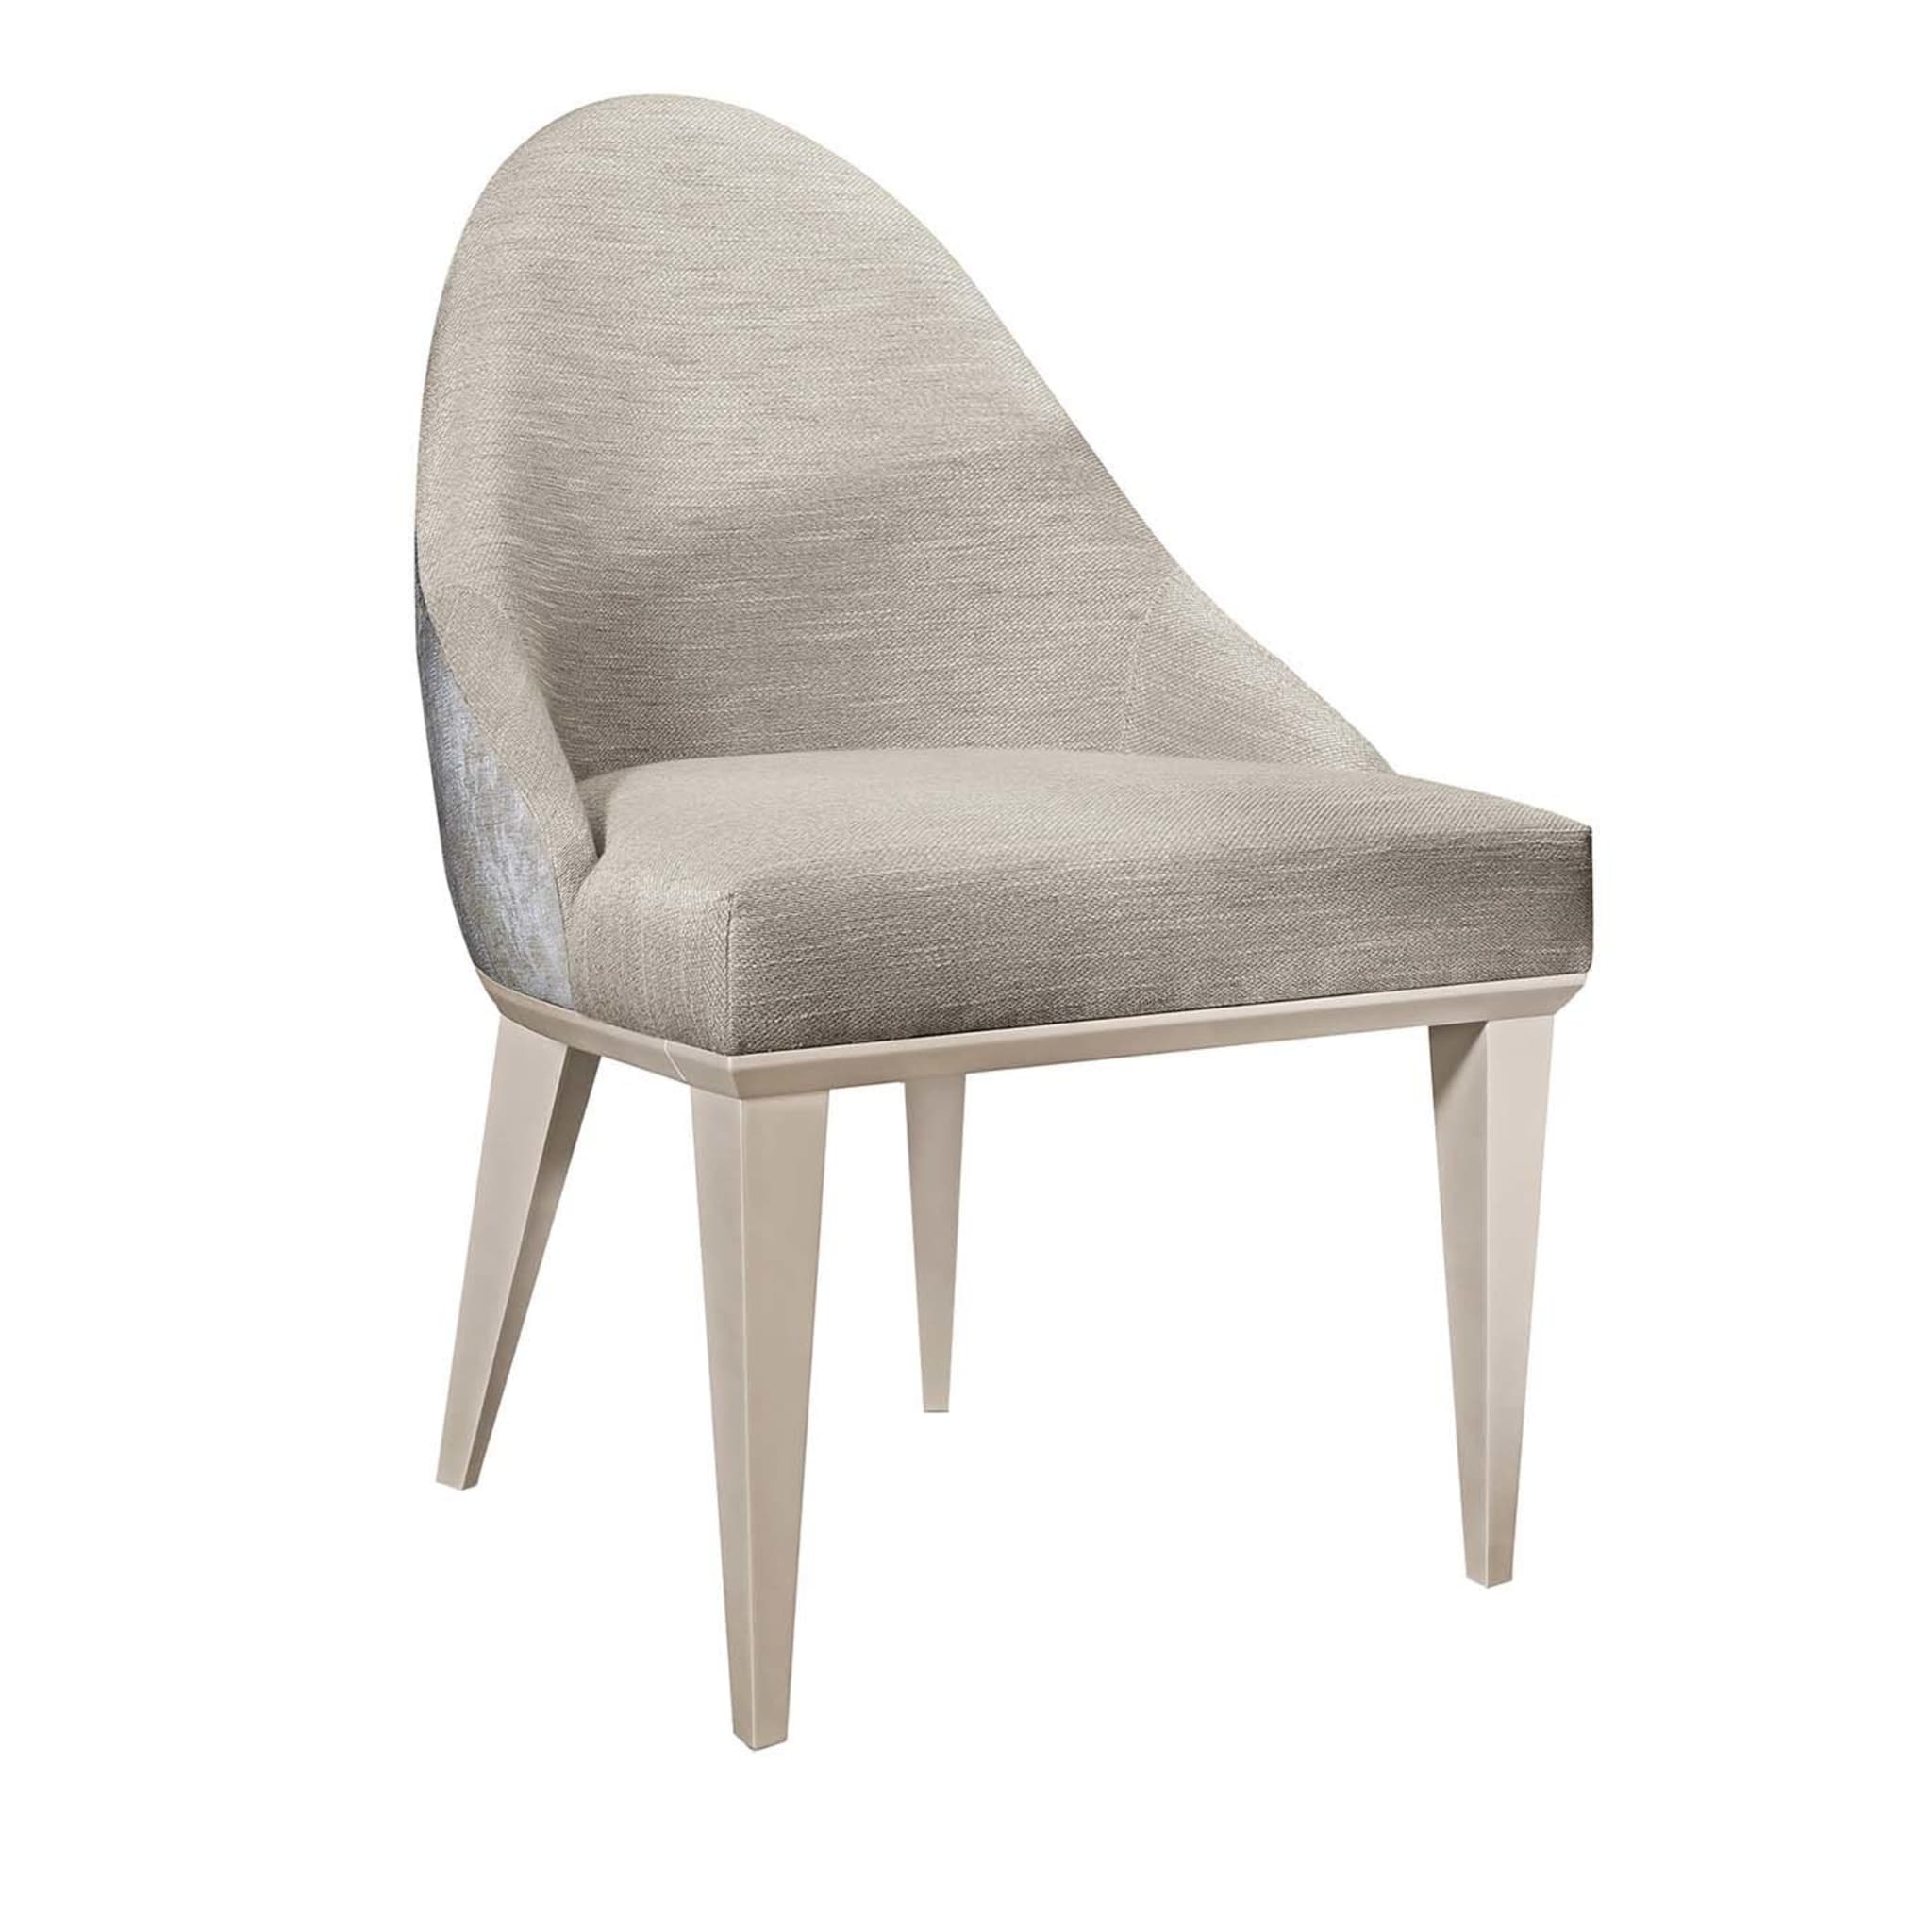 Hanami Soft Style Dining Chair - Main view